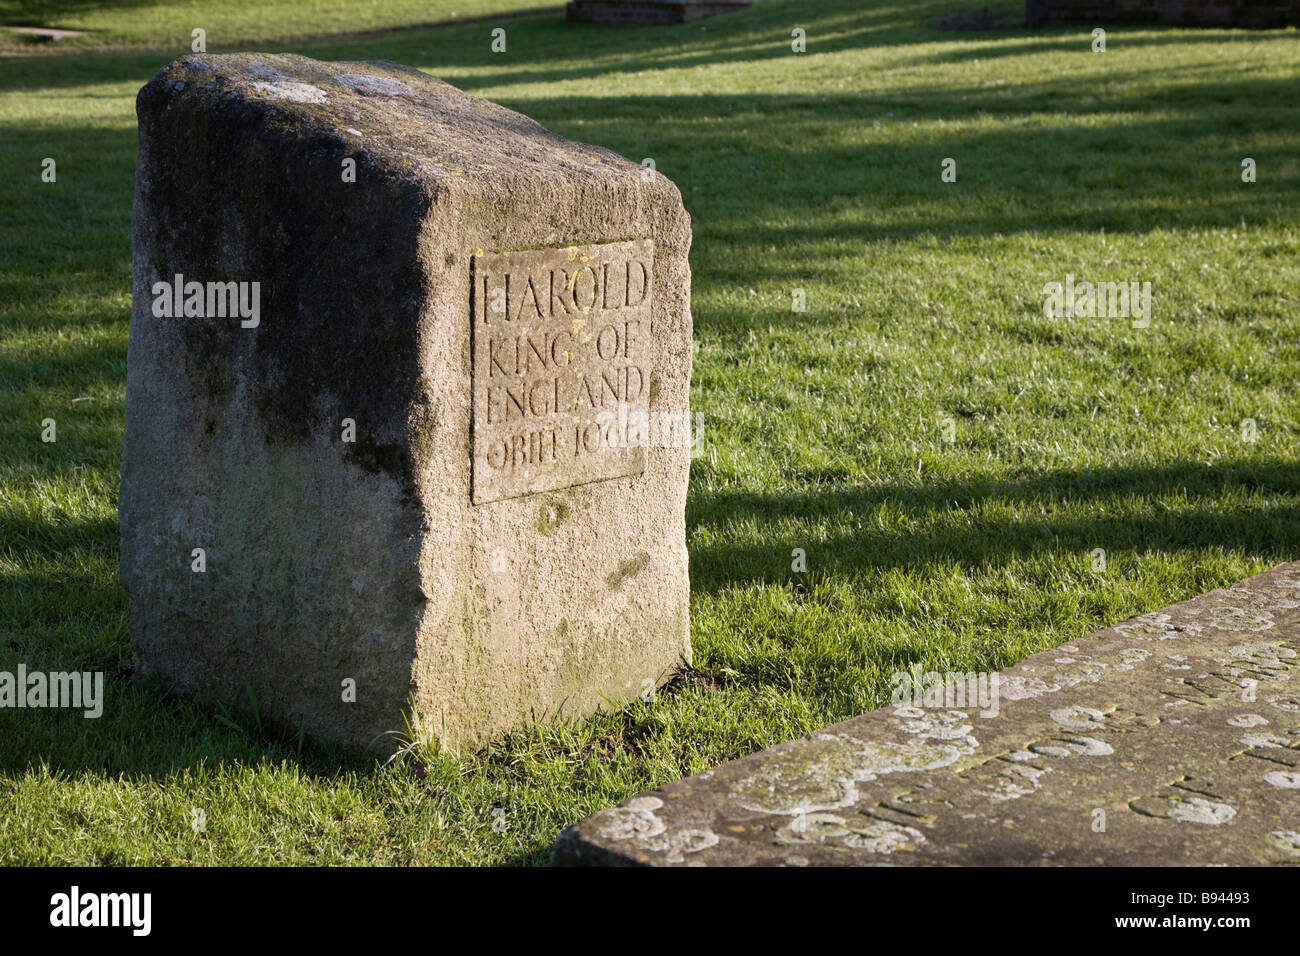 Inscribed marker stone where King Harold of England is believed to be buried. Waltham Abbey, Essex, England. Stock Photo